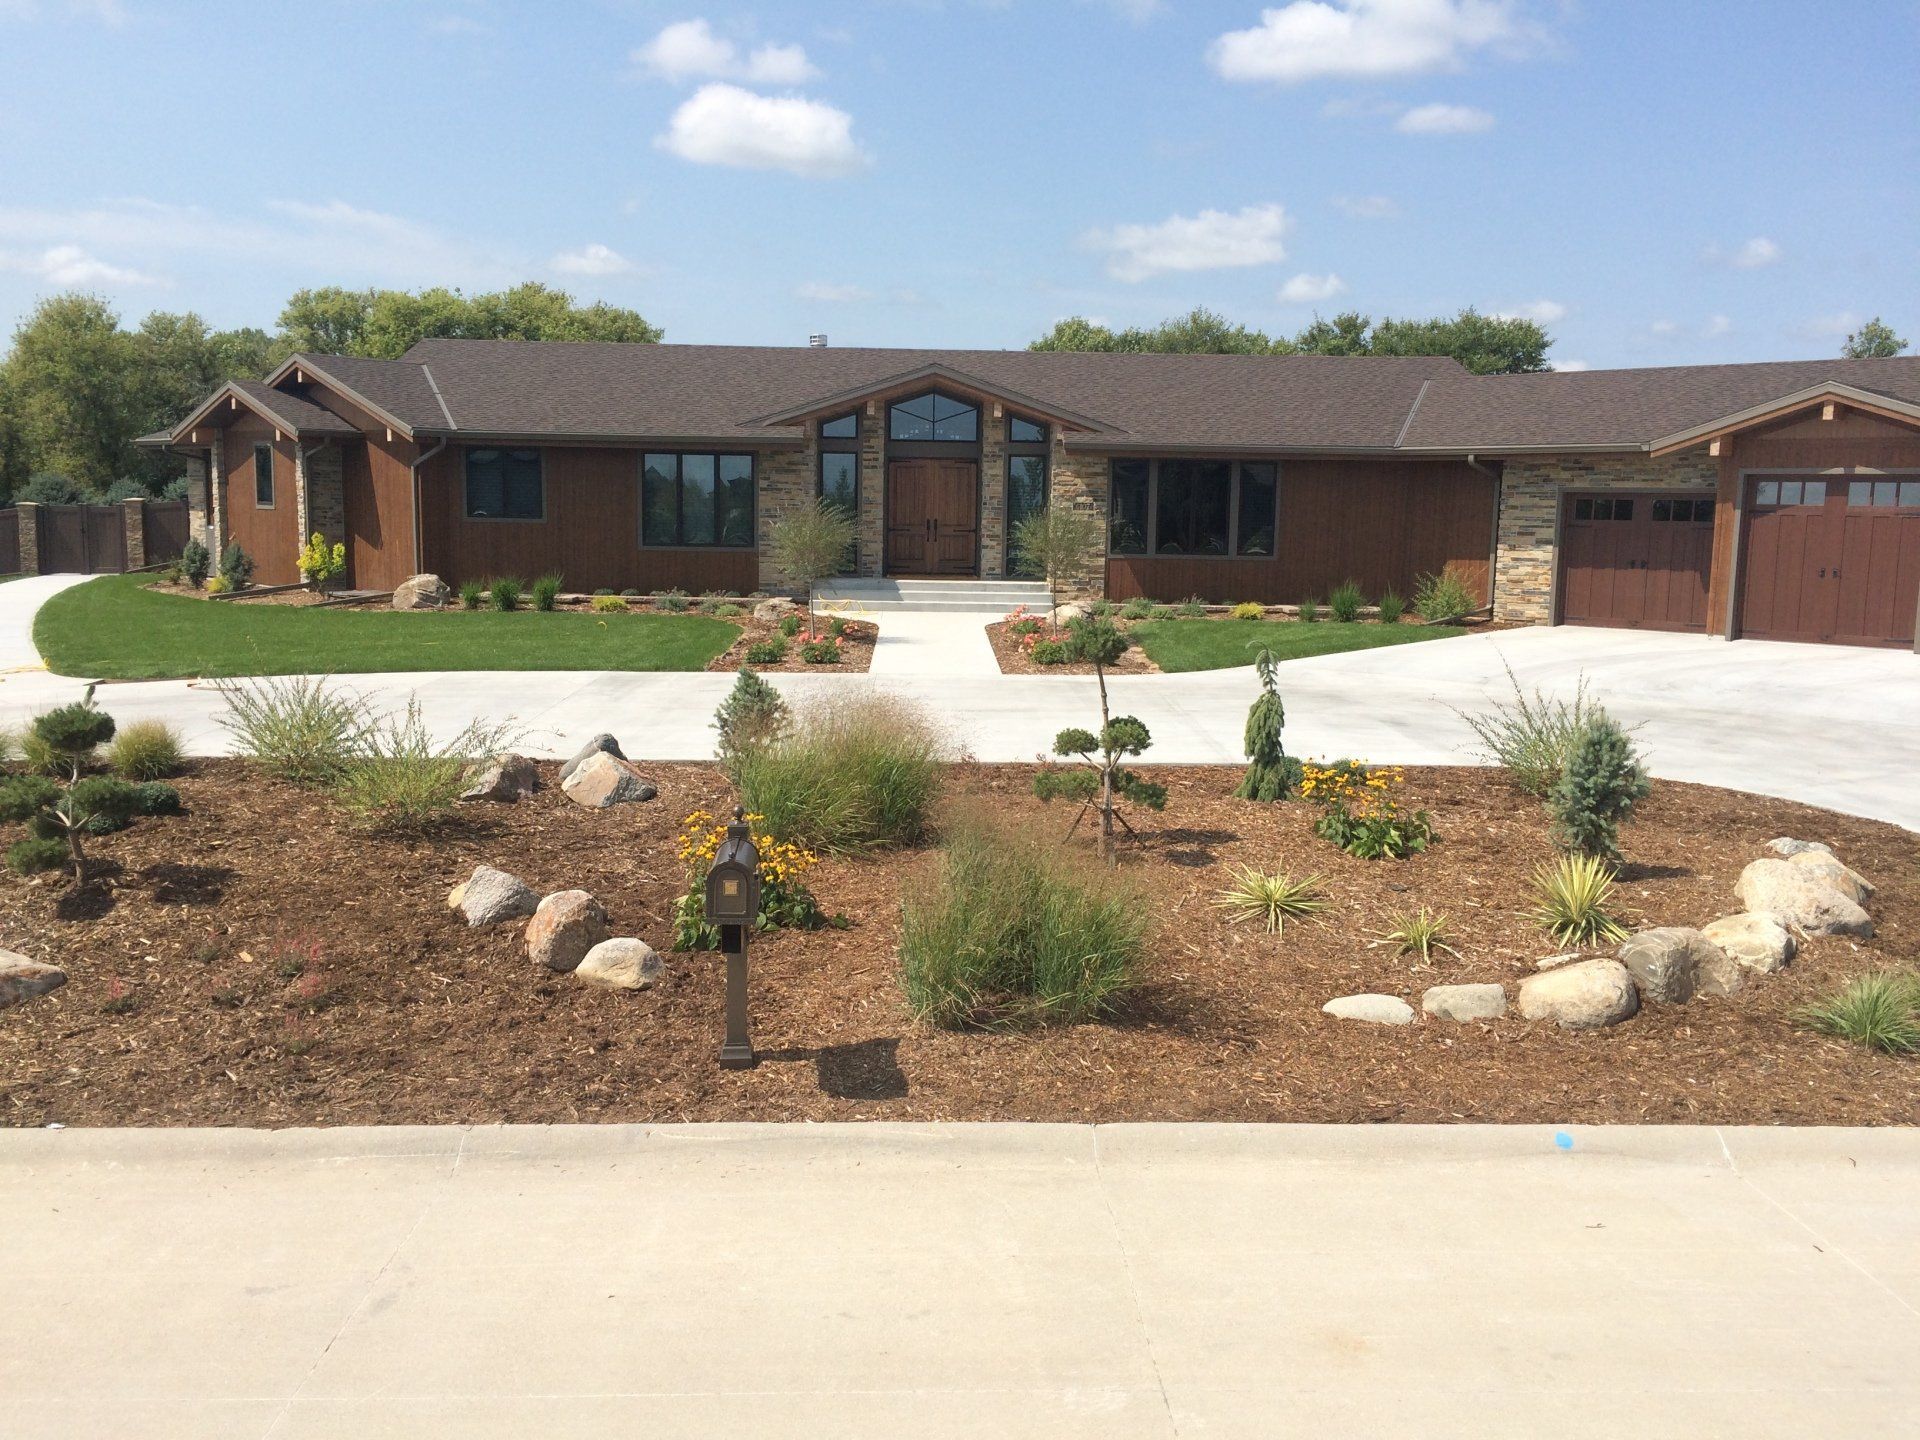 New Residential Home Construction — Hastings, NE — Johnson Imperial Homes